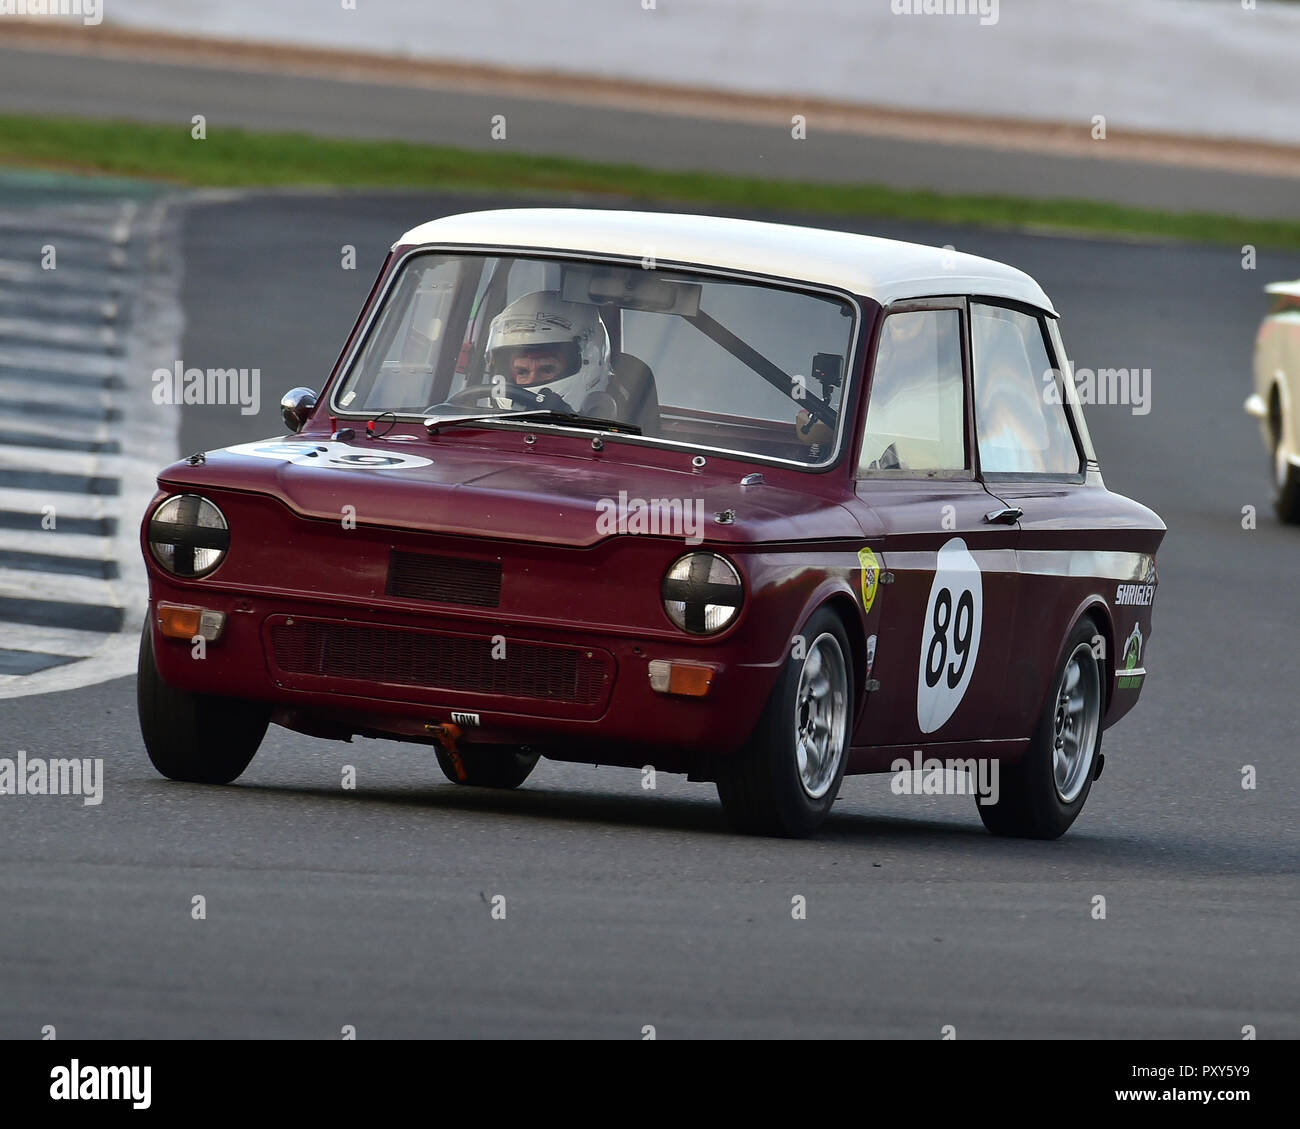 Adrian Oliver, Hillman Imp, HSCC, HRSR, Historic Touring Cars, Silverstone Finals Historic Race Meeting, Silverstone, October 2018, cars, Classic Raci Stock Photo